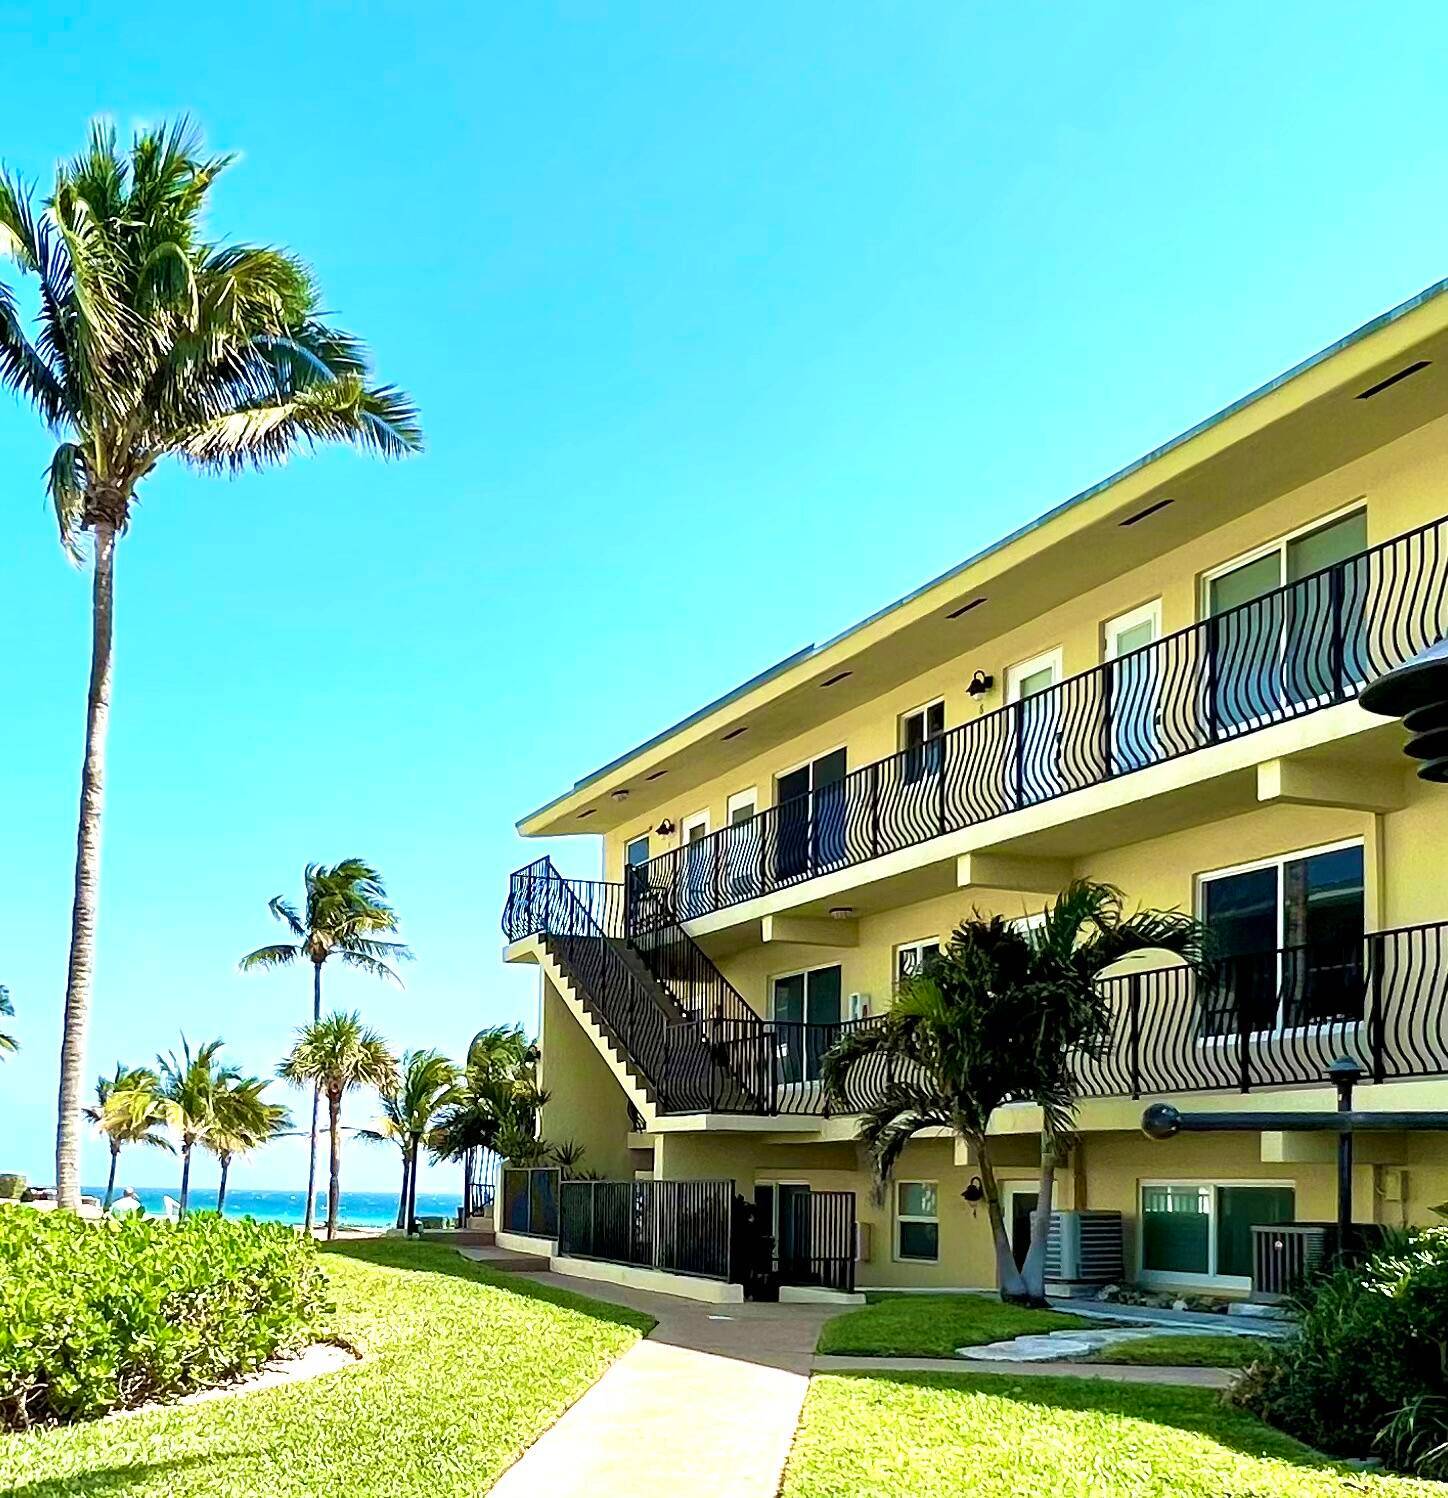 Imagine waking up every morning to the sound of waves crashing and breathtaking views of the ocean and intracoastal from every room !